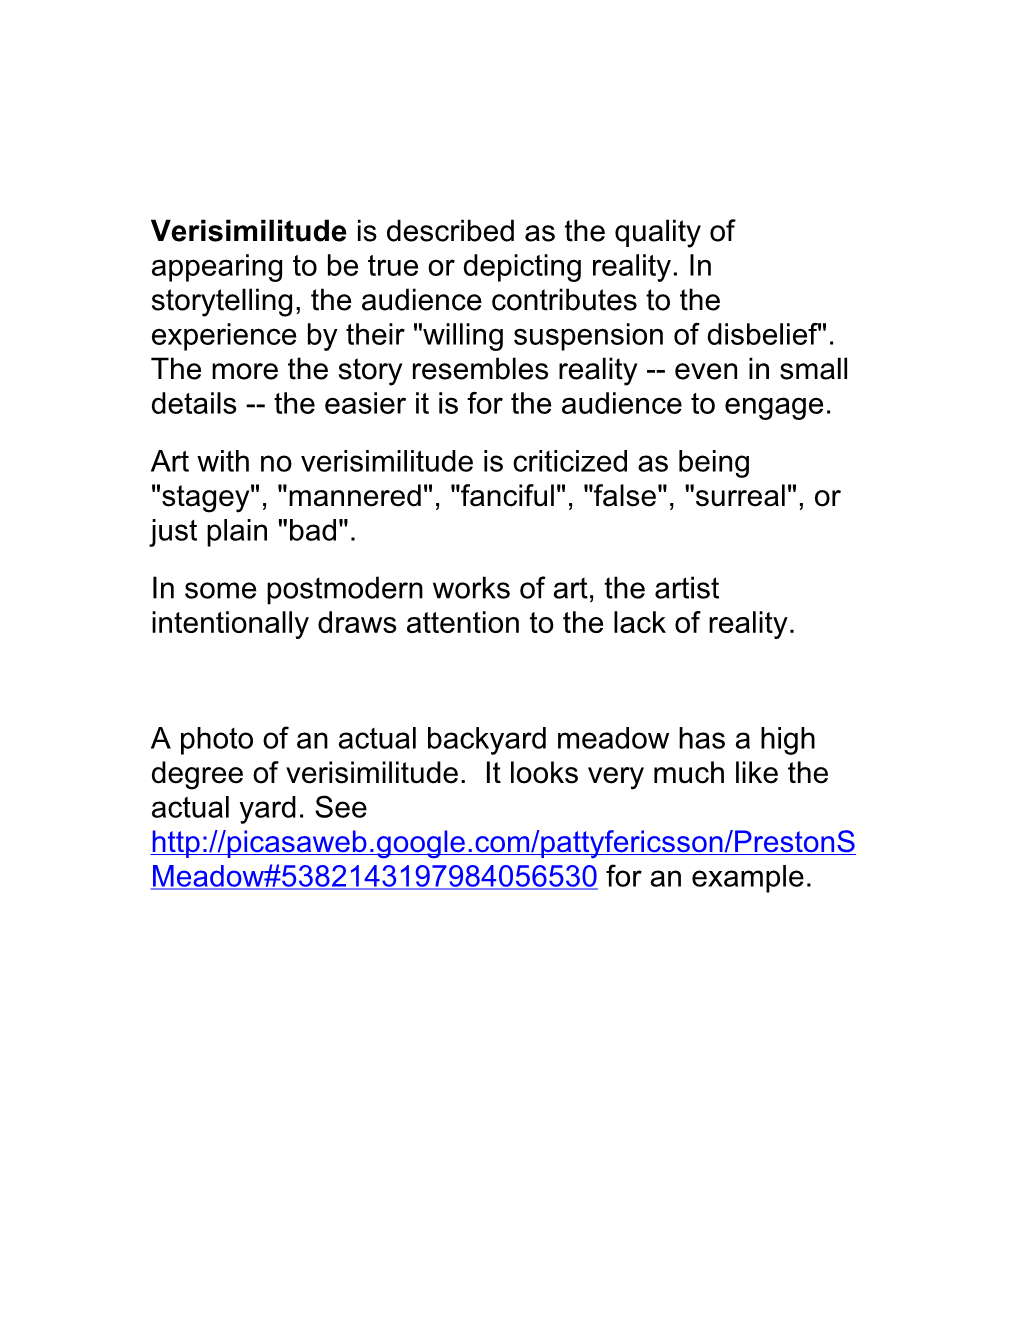 Verisimilitude Is Described As the Quality of Appearing to Be True Or Depicting Reality